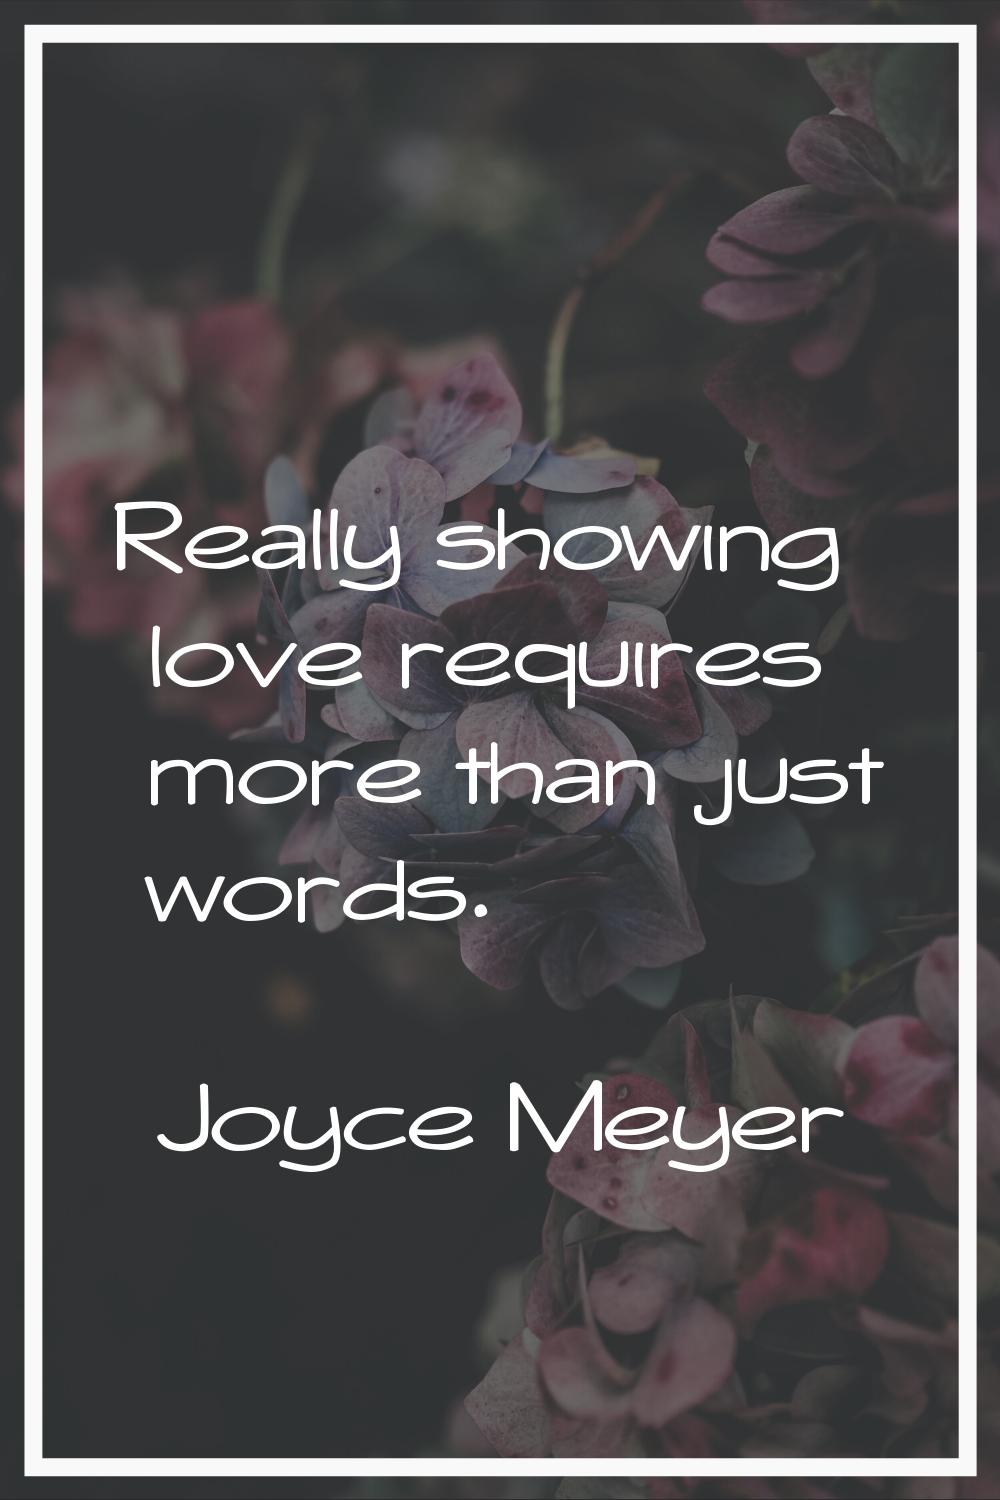 Really showing love requires more than just words.